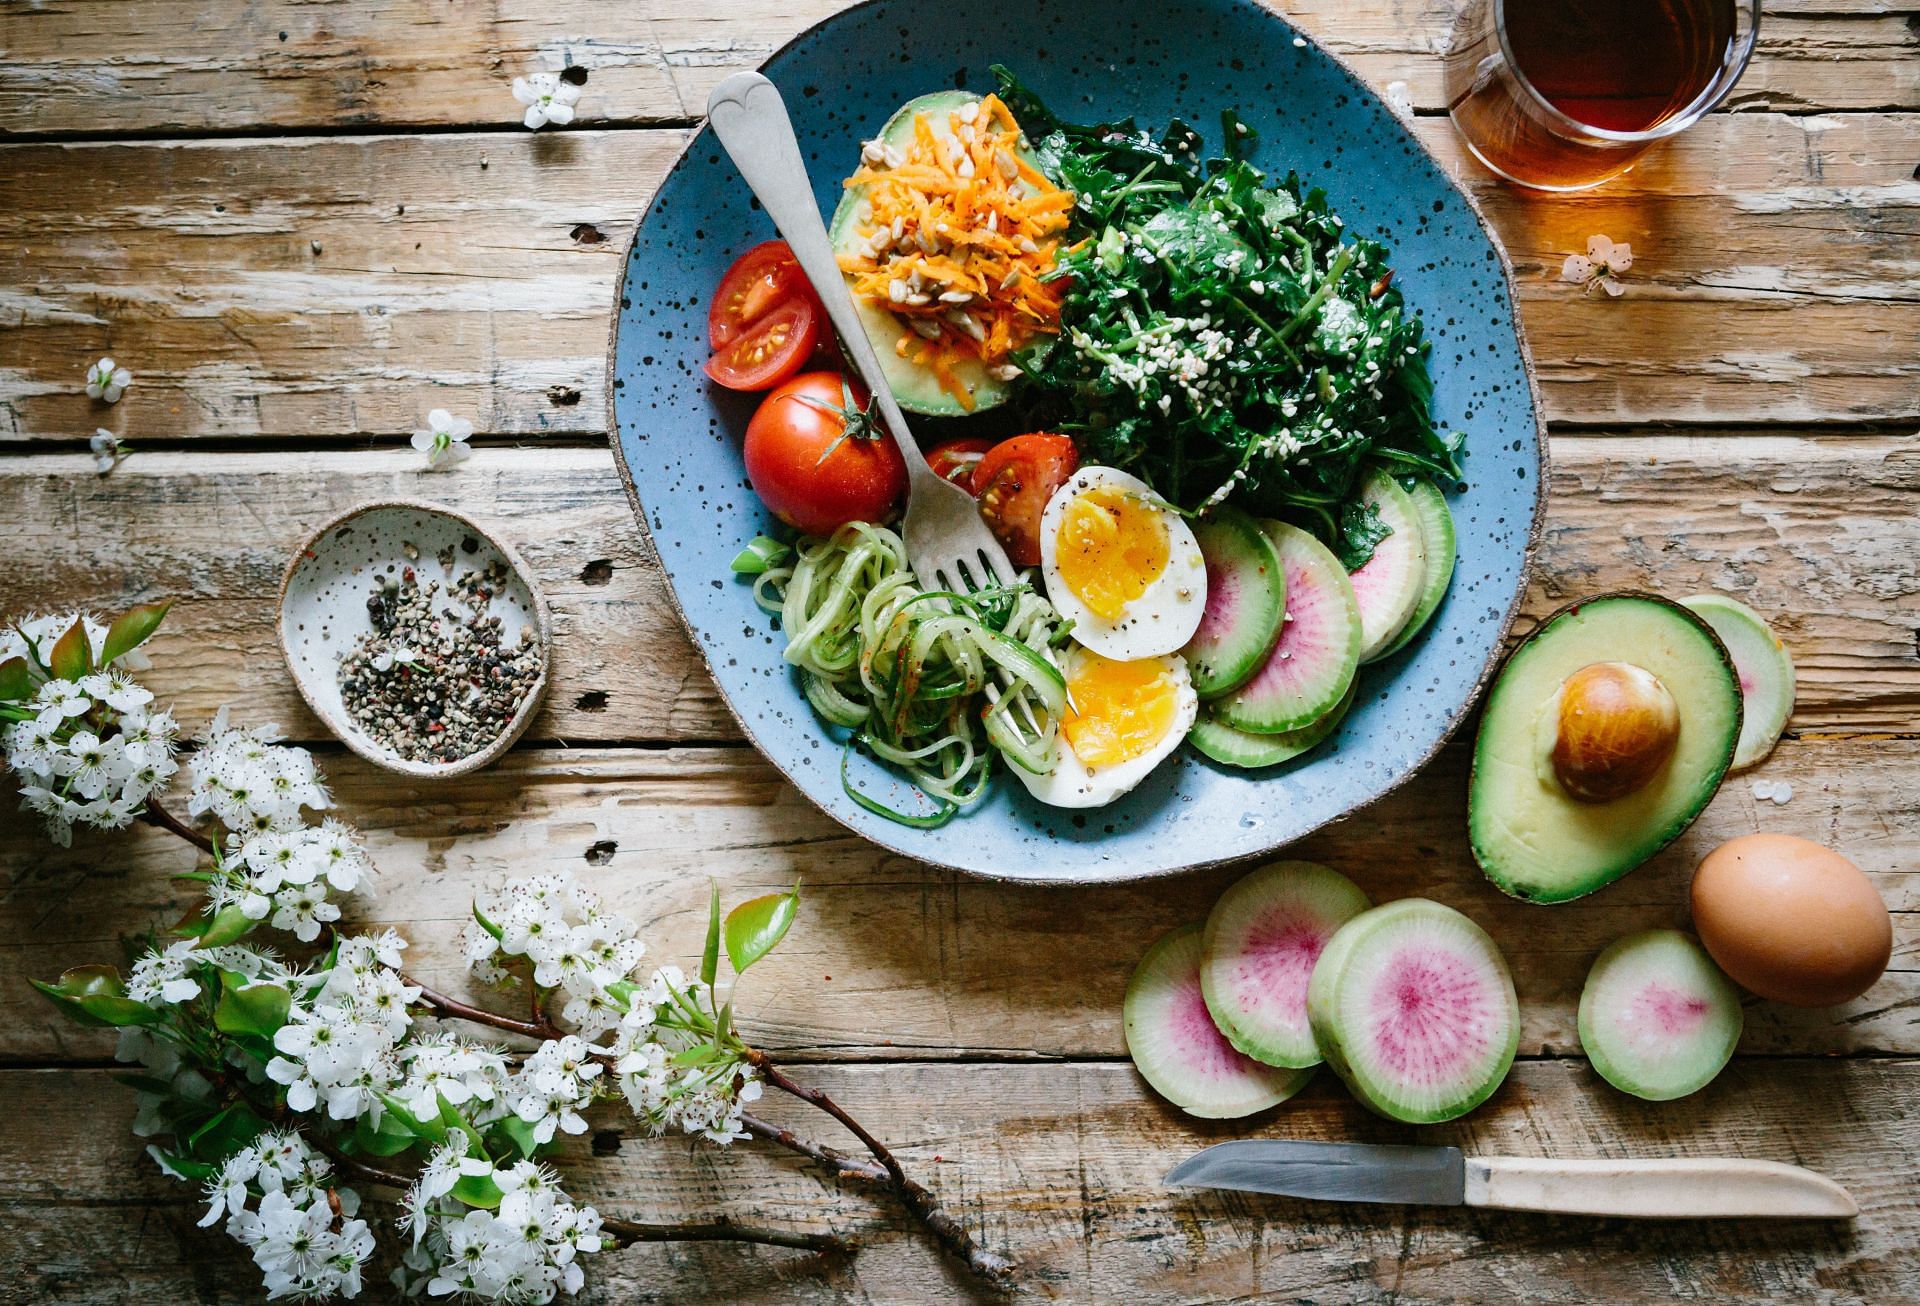 vegan diet is good for those who want to lose weight. (Image via Unsplash / Brooke Lark)